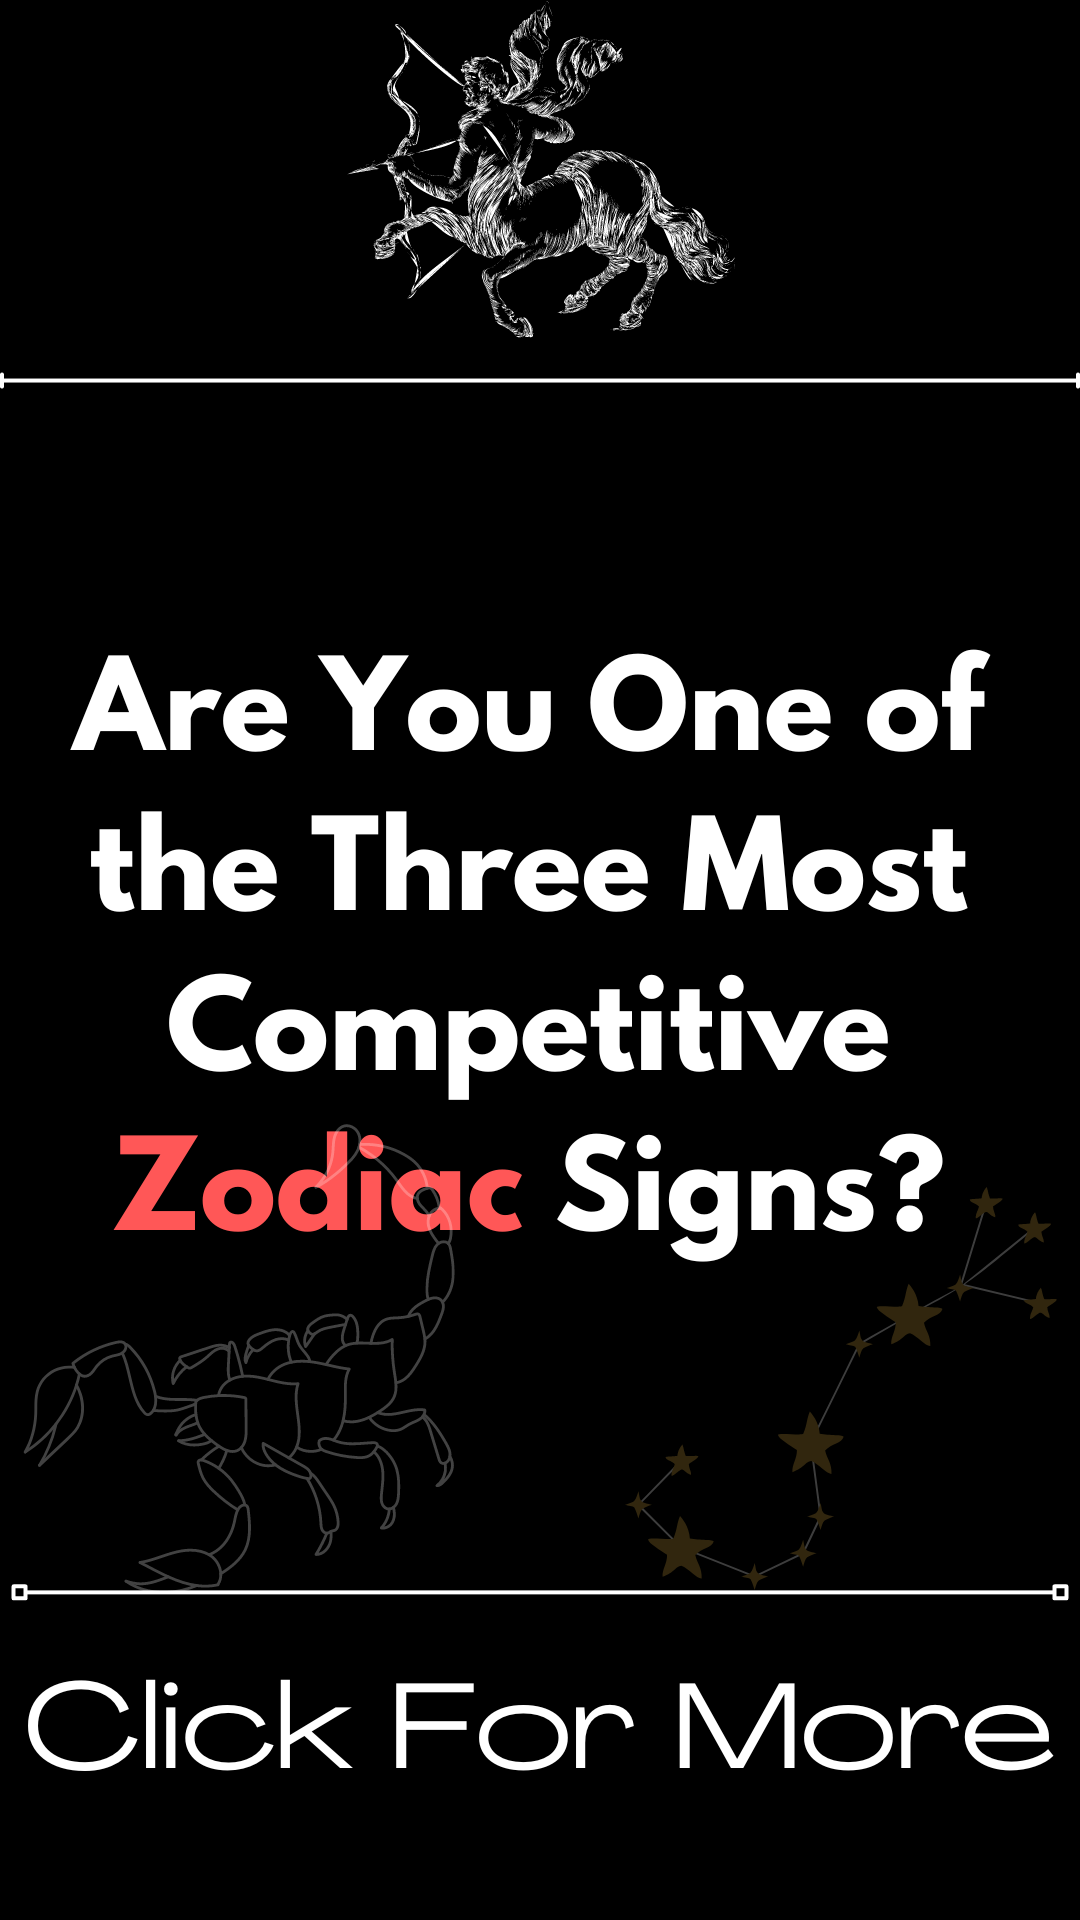 Are You One of the Three Most Competitive Zodiac Signs